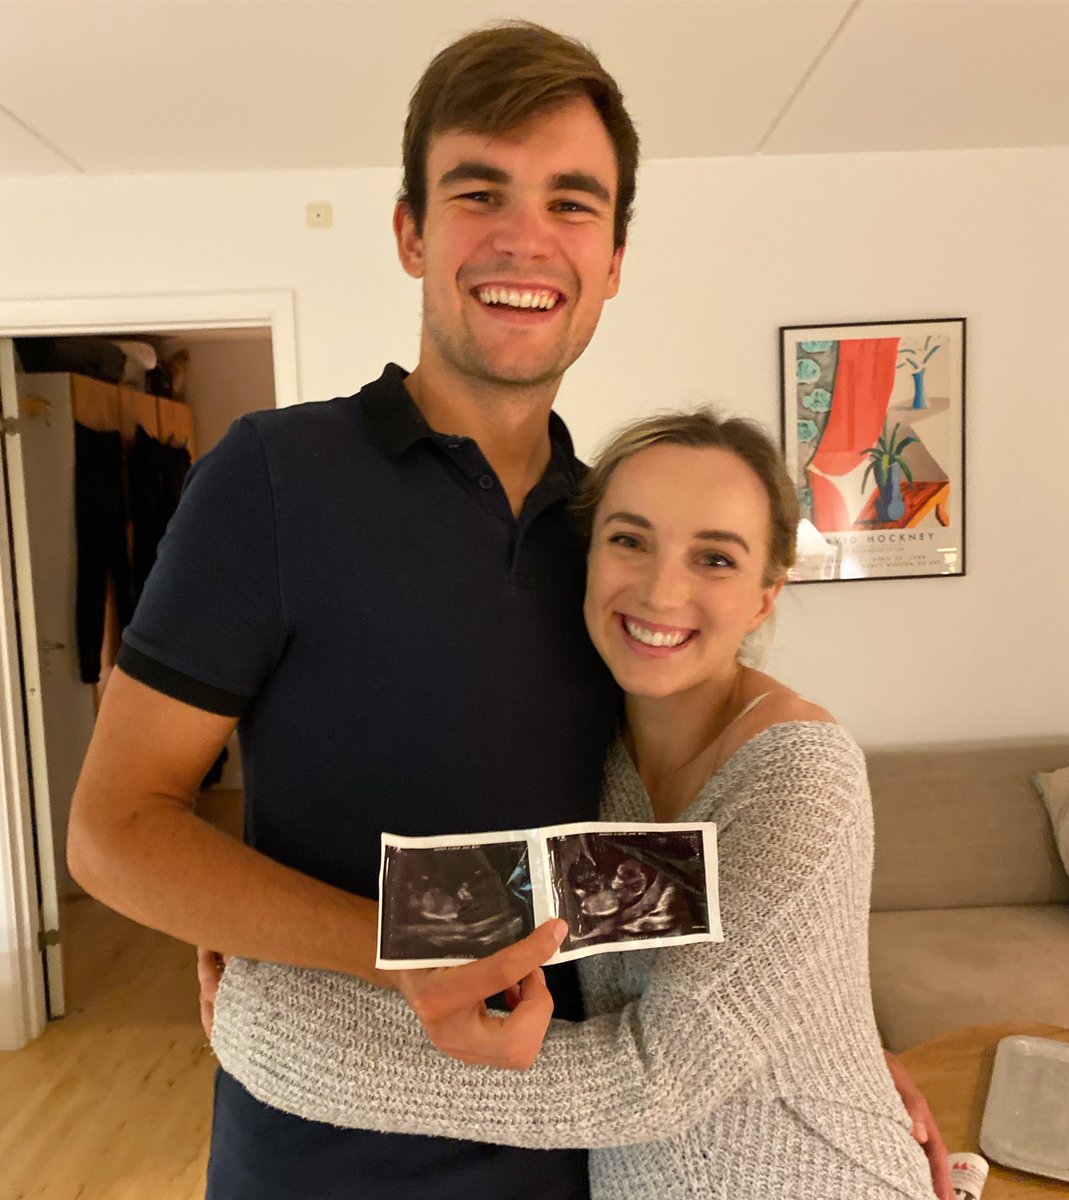 Casper and I are excited to announce that we are expecting our first child! We can’t believe how lucky we are and are so excited to start the next part of our lives together.